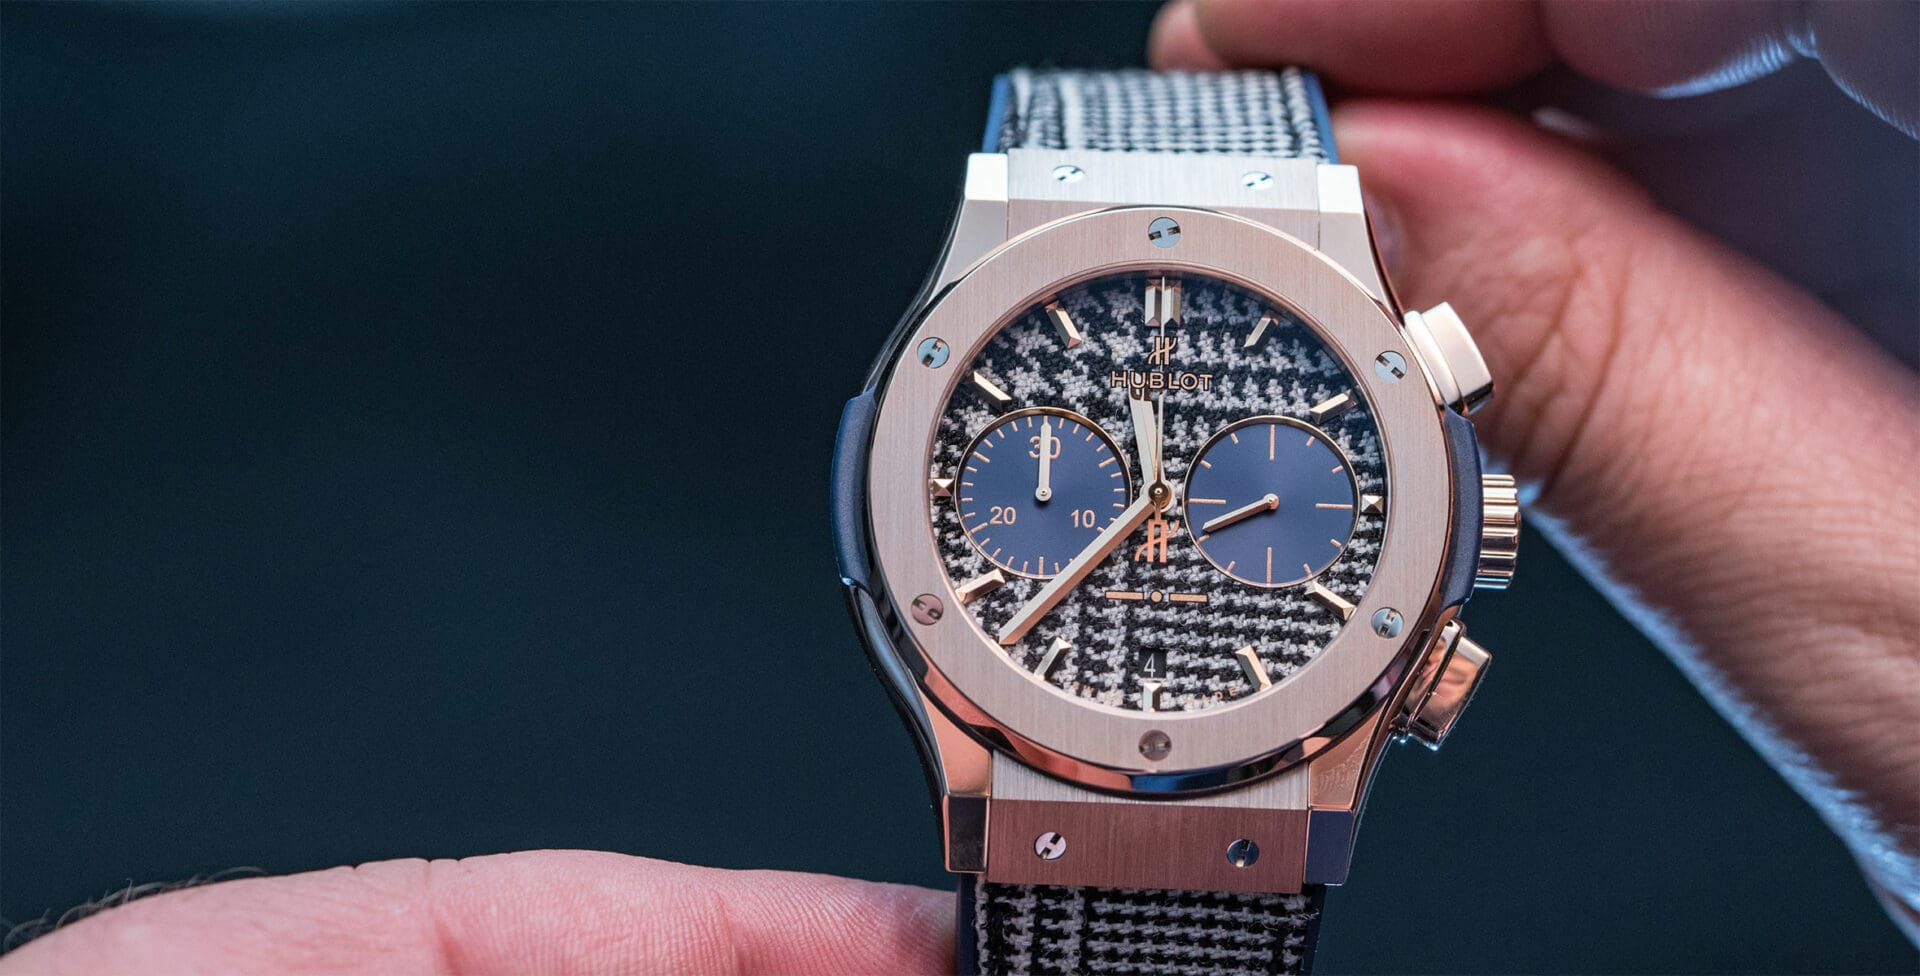 HANDS-ON: Hublot takes matching your watch to your suit to the next level with the Classic Fusion Italia Independent